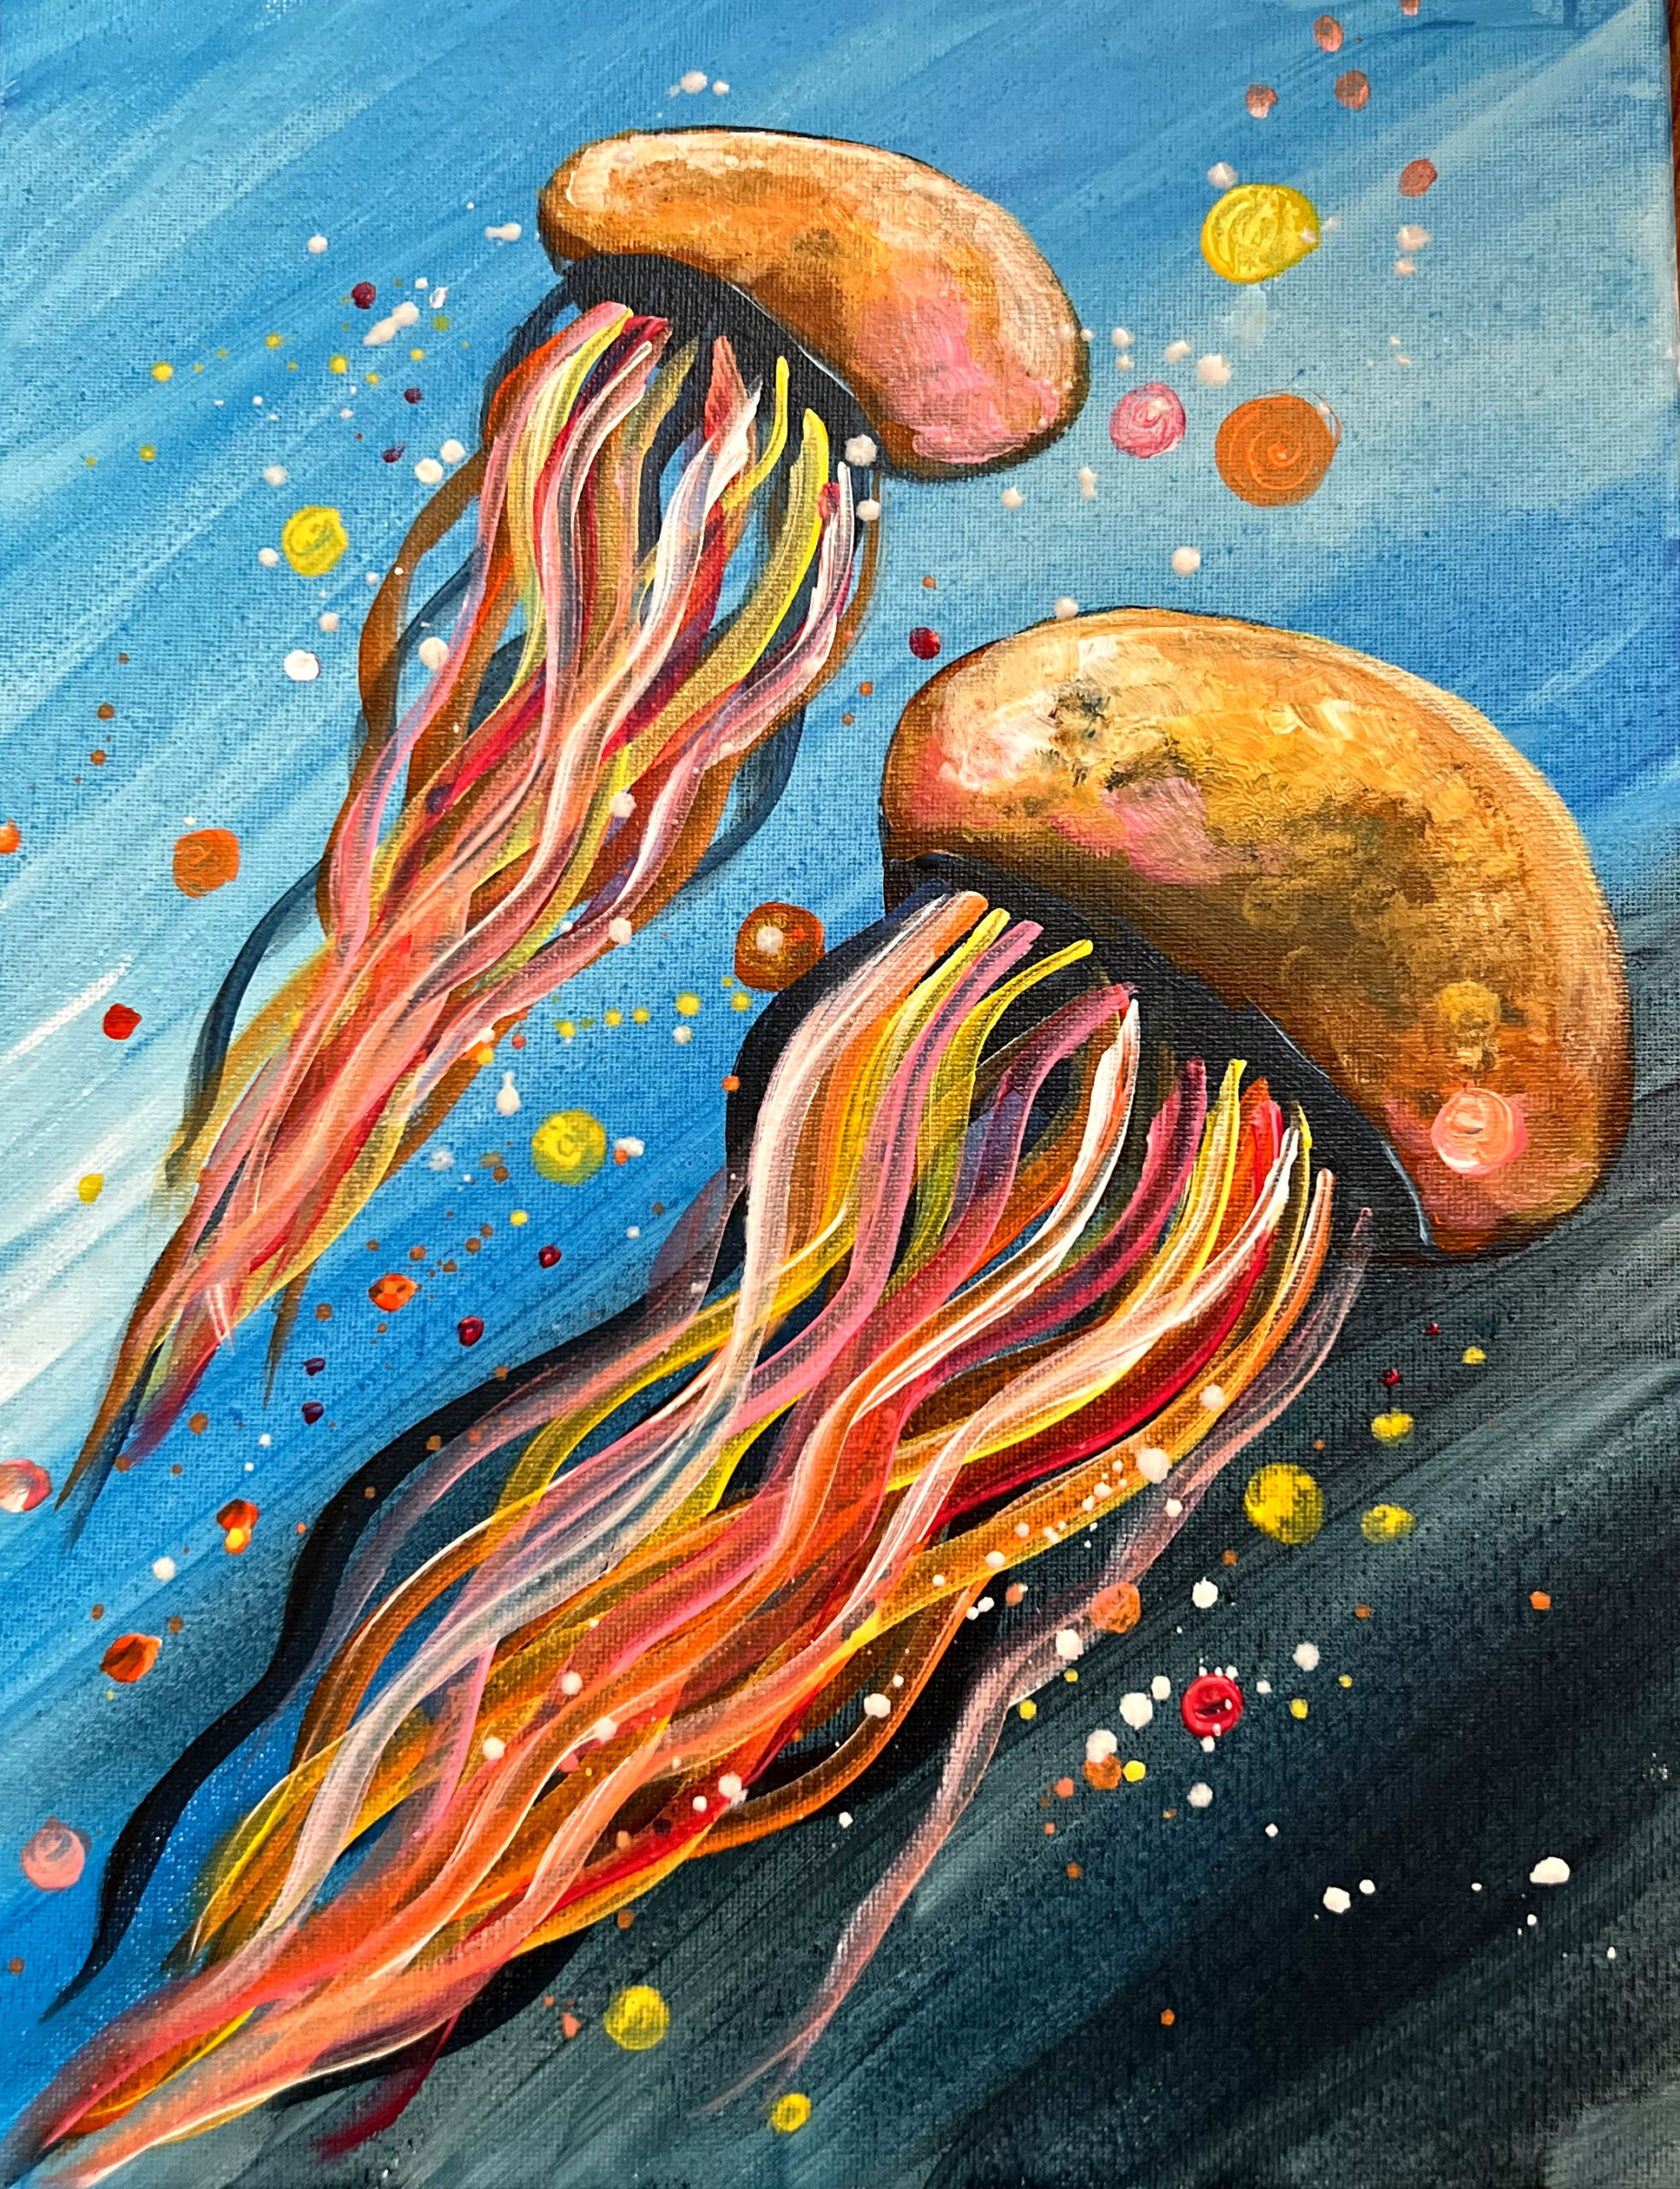 Jellyfish paint and sip classes in washington state by artvana